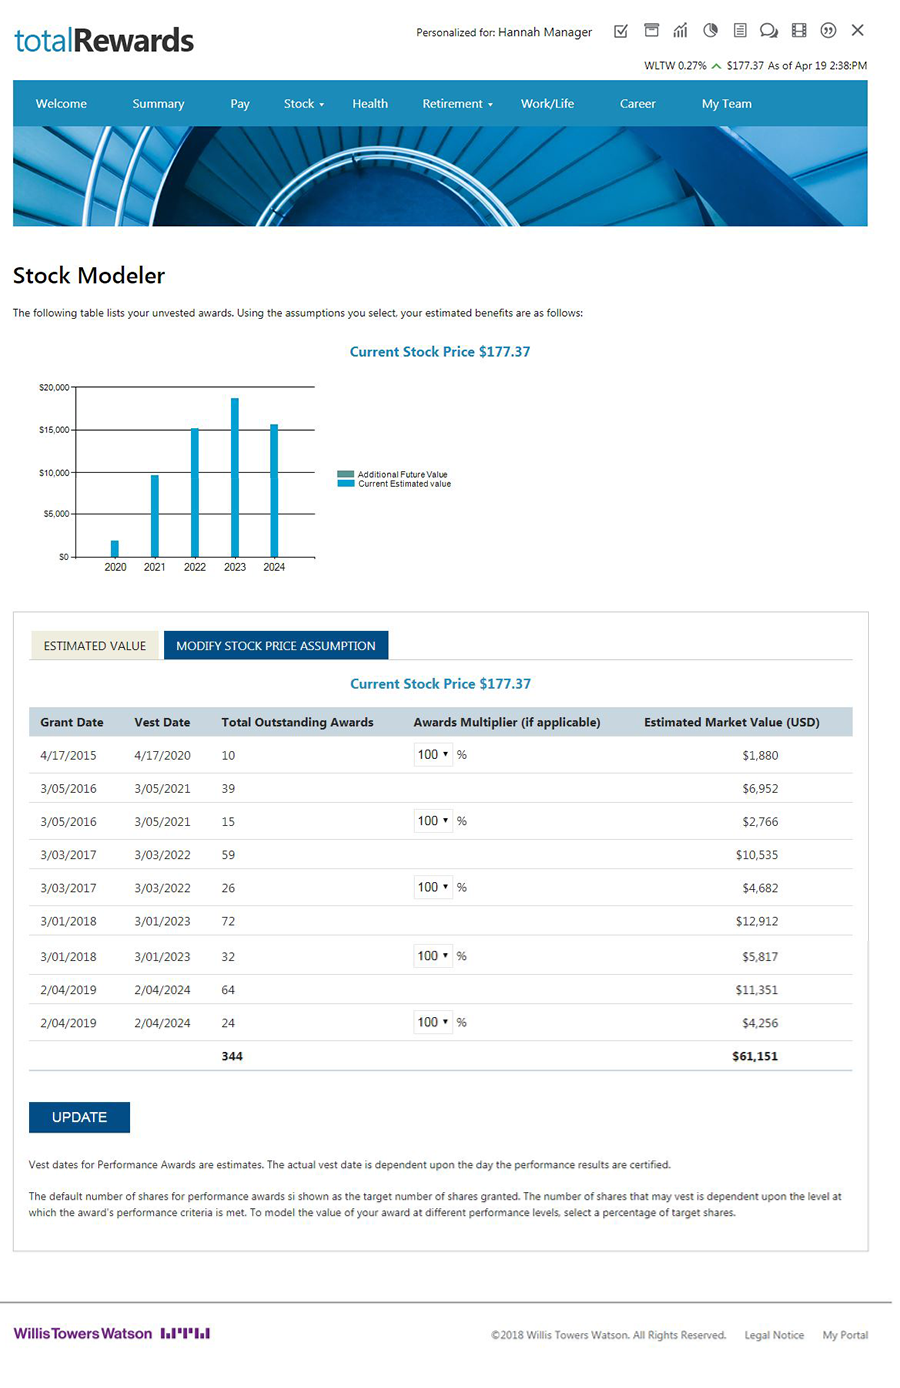 Screenshot pf the stock modeler tool to show sample list of unvested awards. description below